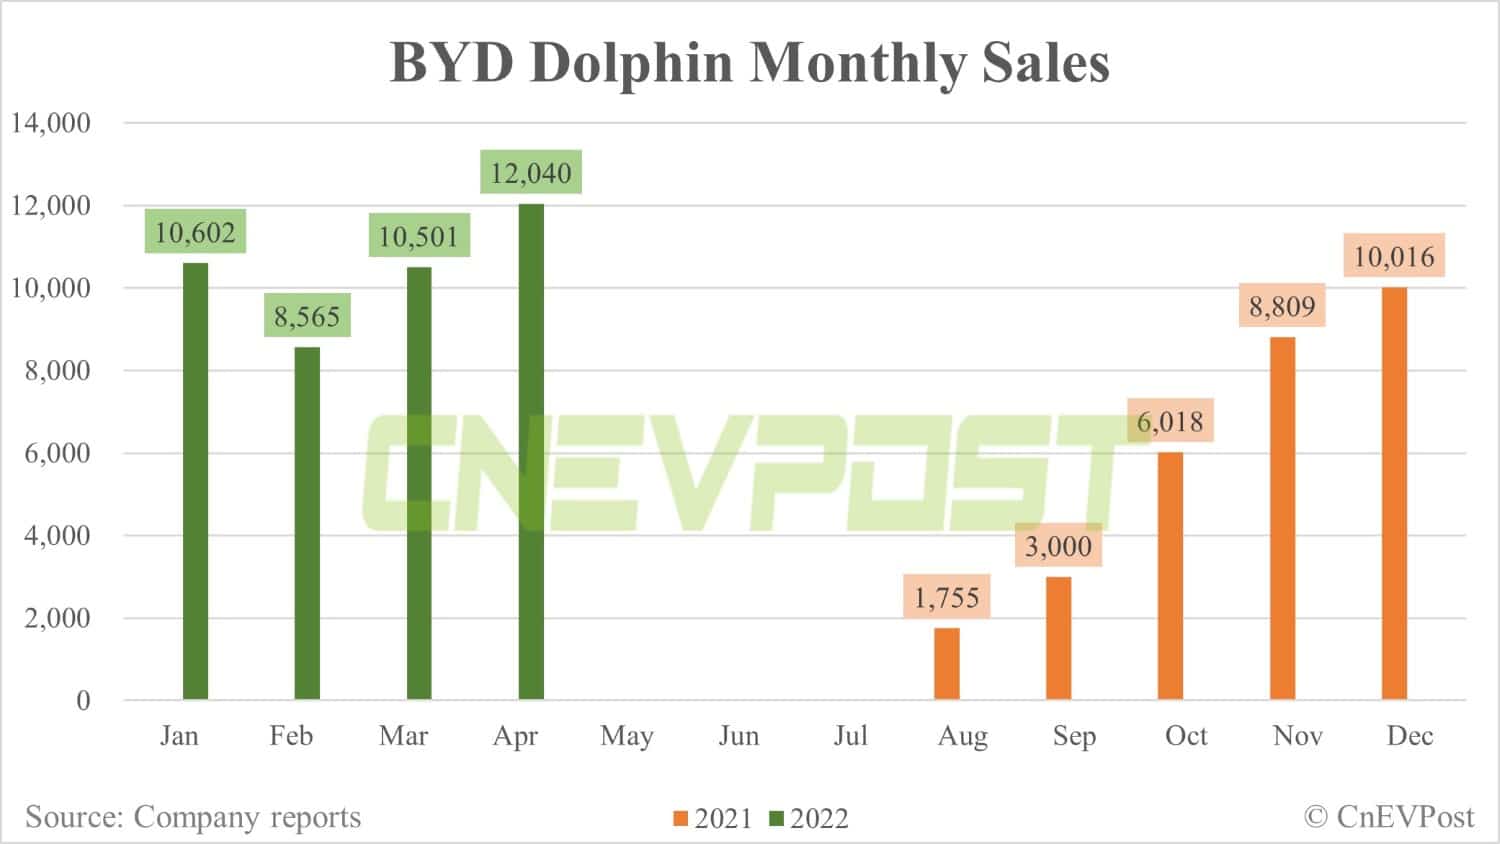 BYD April sales breakdown: Han family at 13,421 units, Dolphin at 12,040-CnEVPost